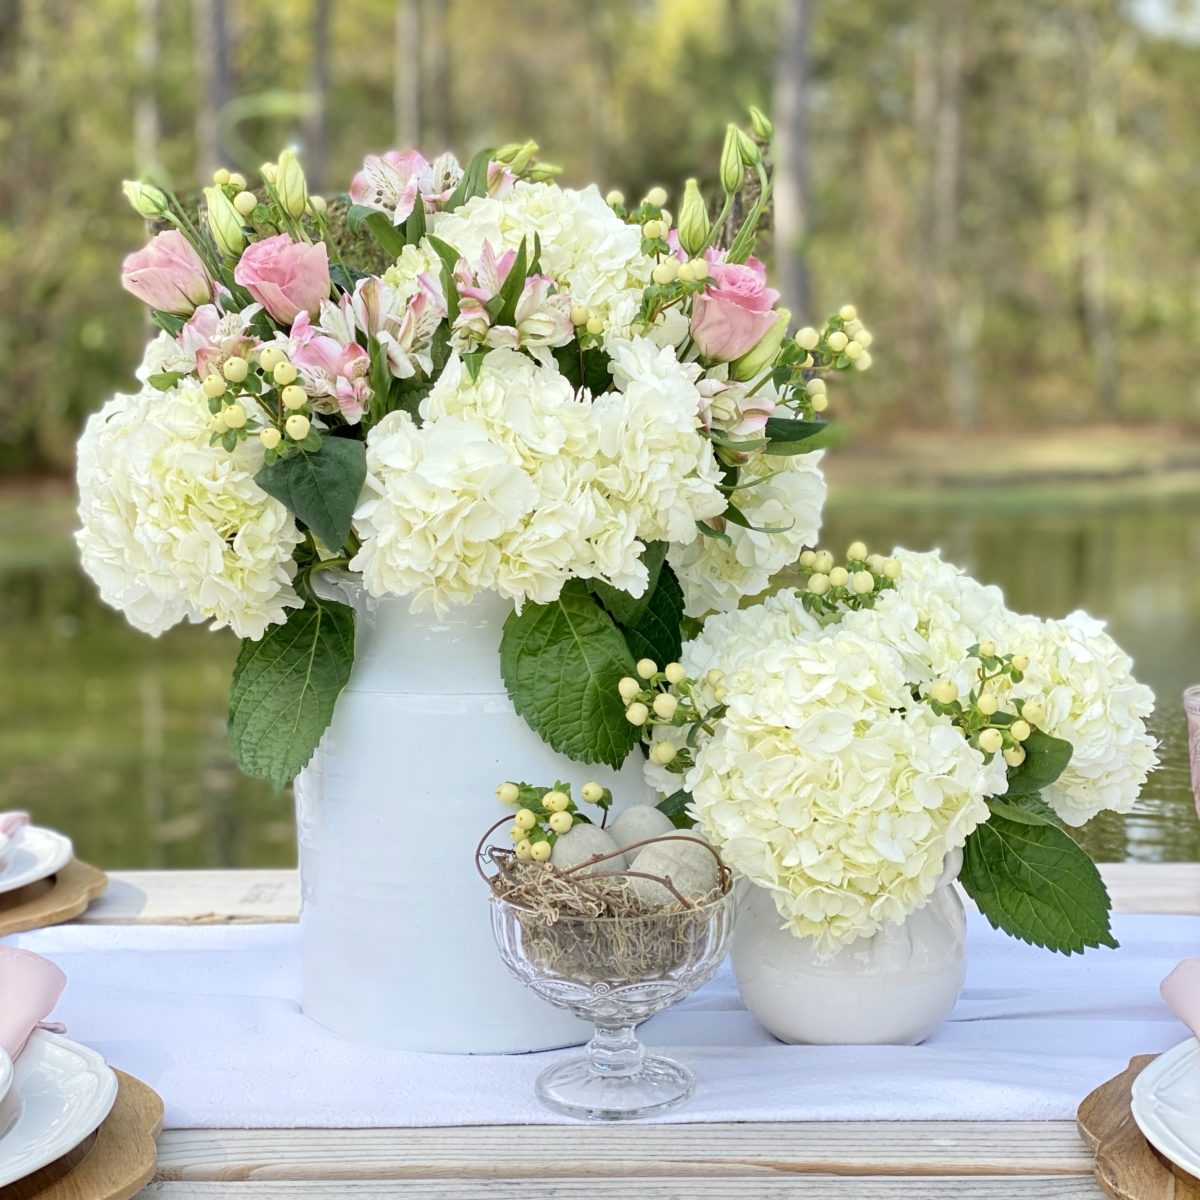 Floral centerpiece made with white  and pink flowers in white crocks with a glass dish filled with concrete eggs to look like their in a nest.